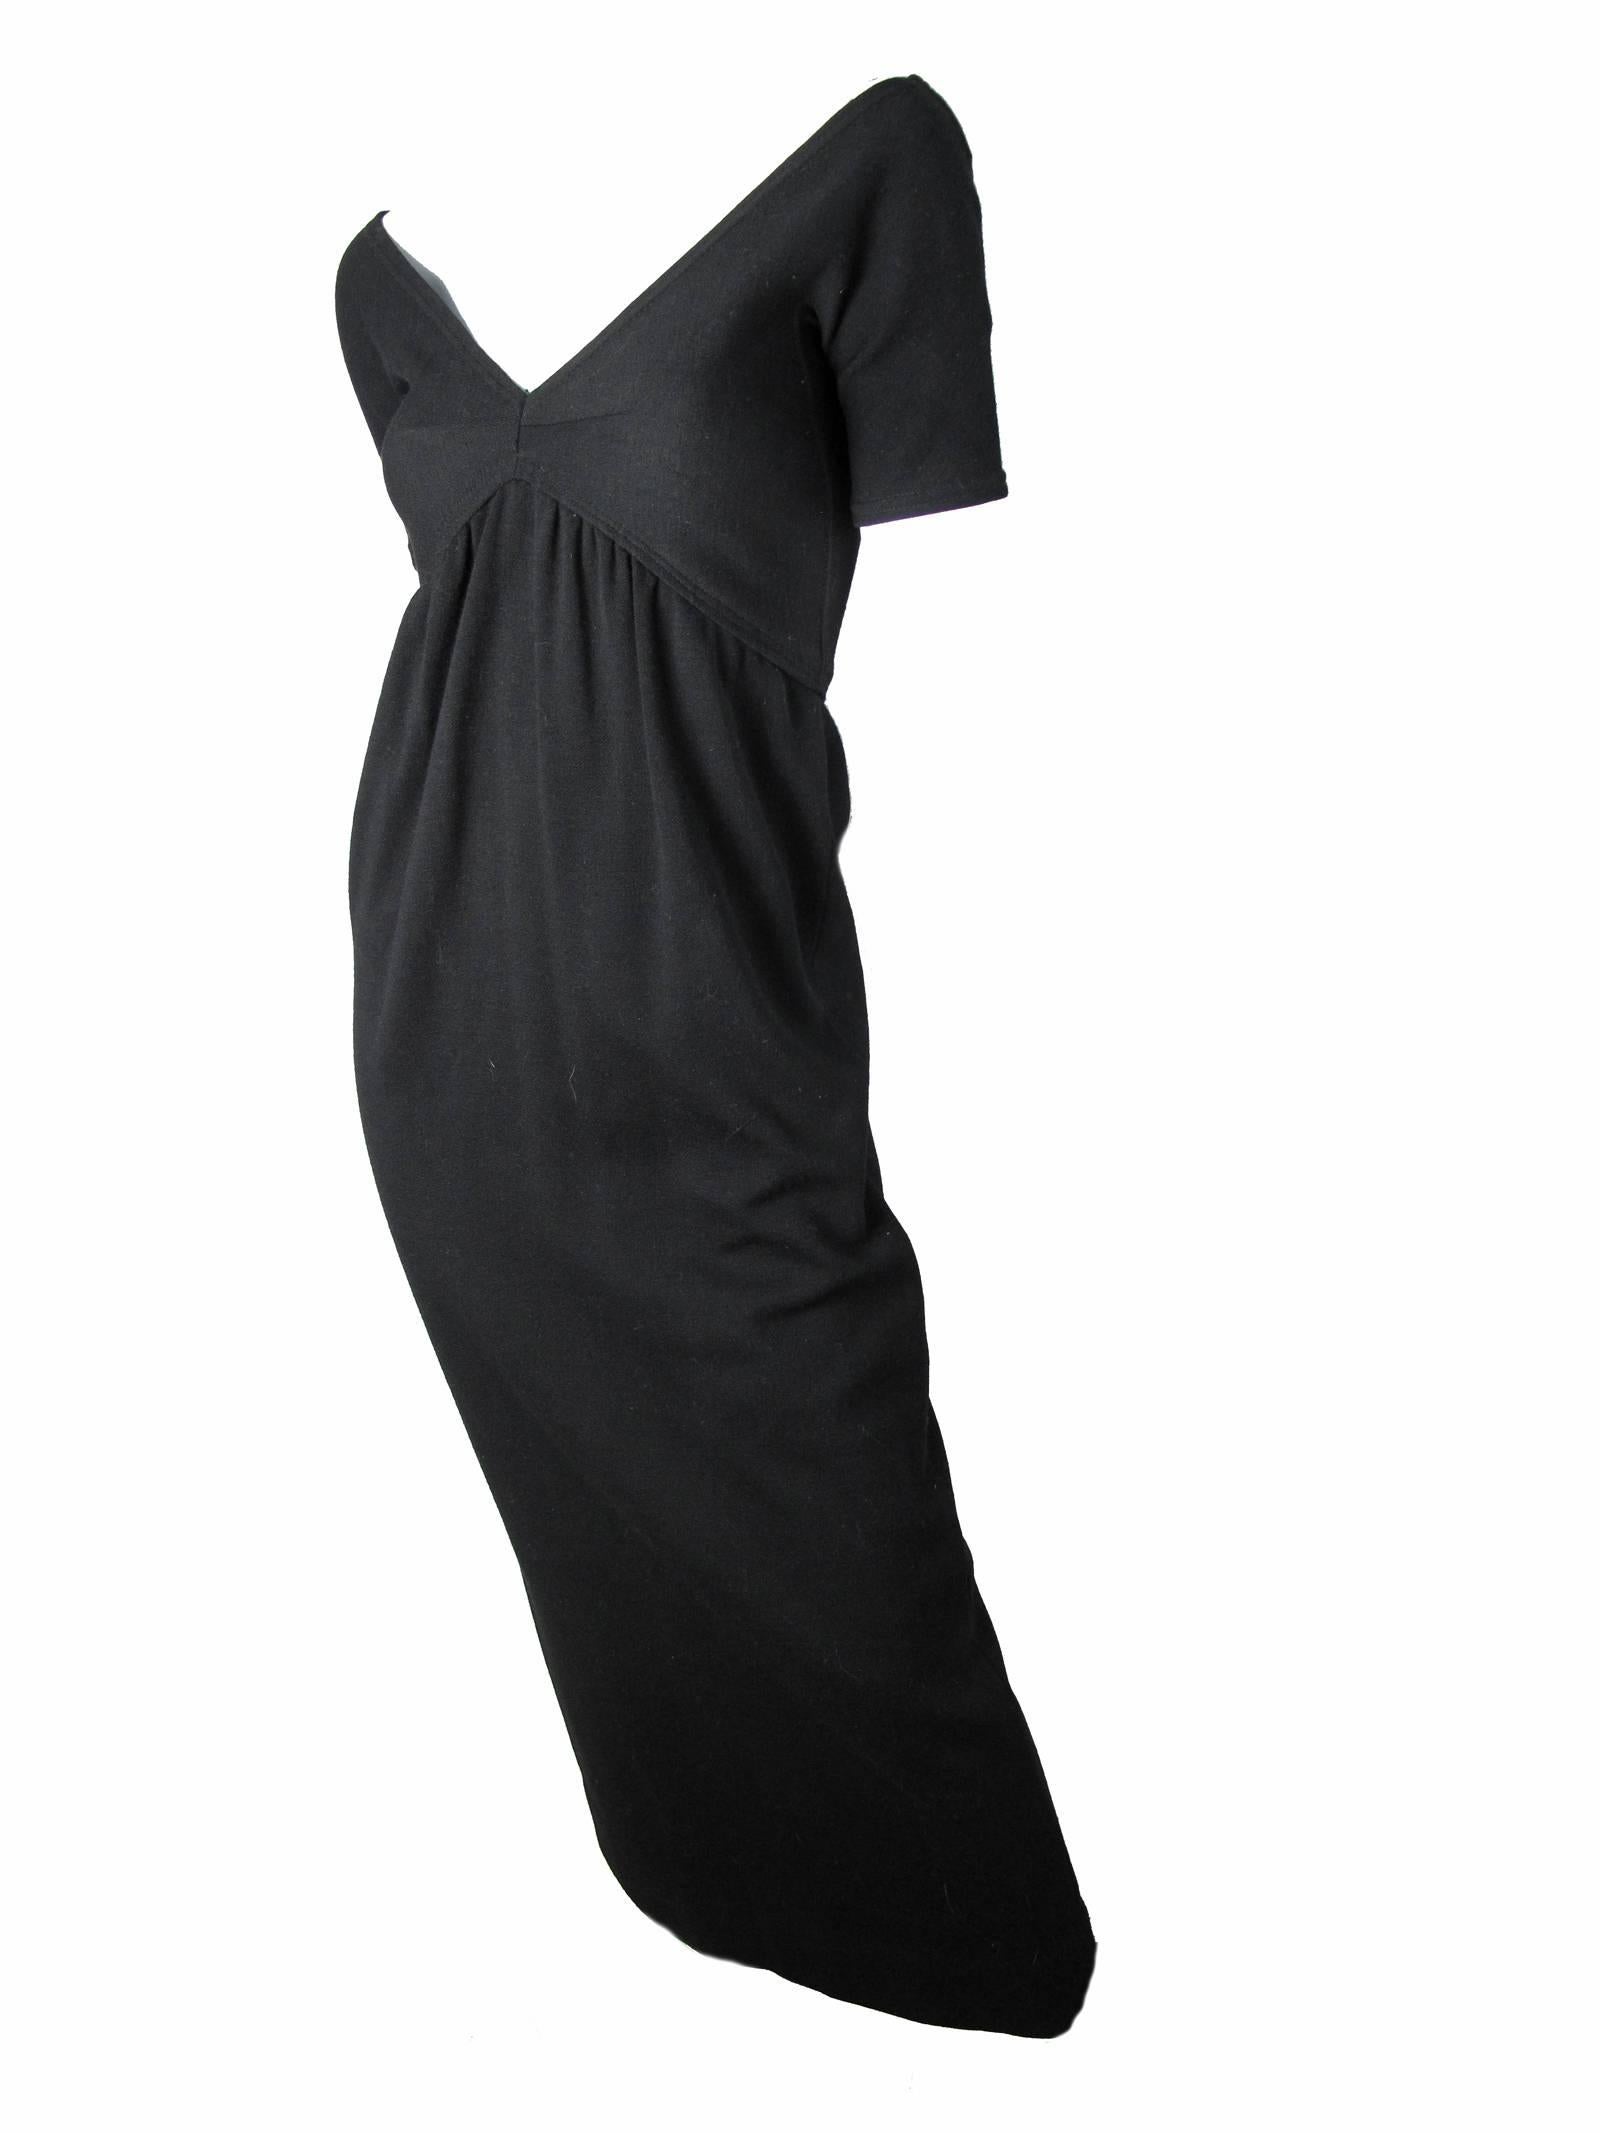 1970s Rudi Gernreich black wool column gown with small capped sleeves and v neck line. Condition: Very good. Marked size 8 but fits current US 6

31